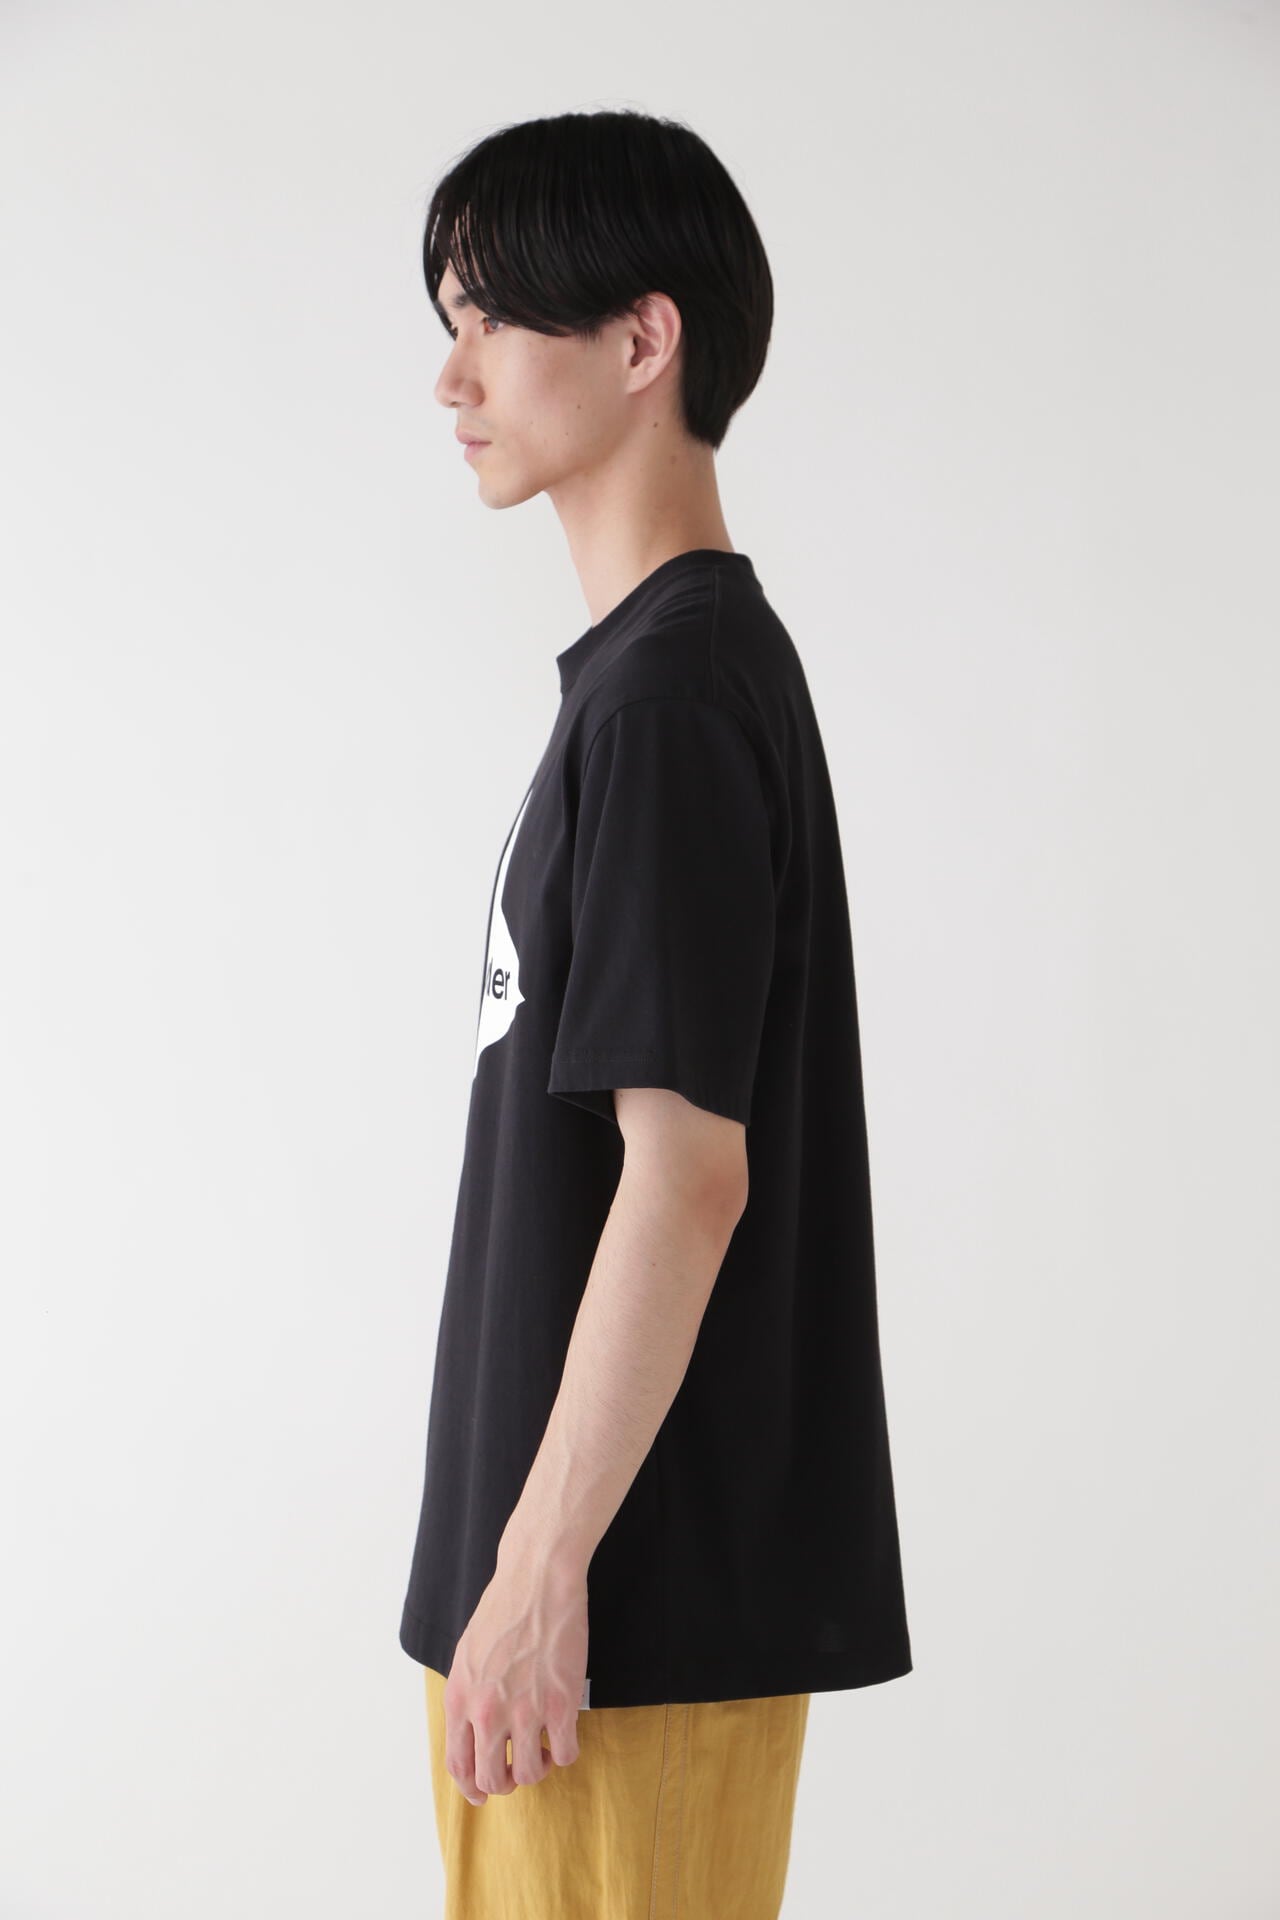 and wander big logo T | cut_knit | and wander ONLINE STORE